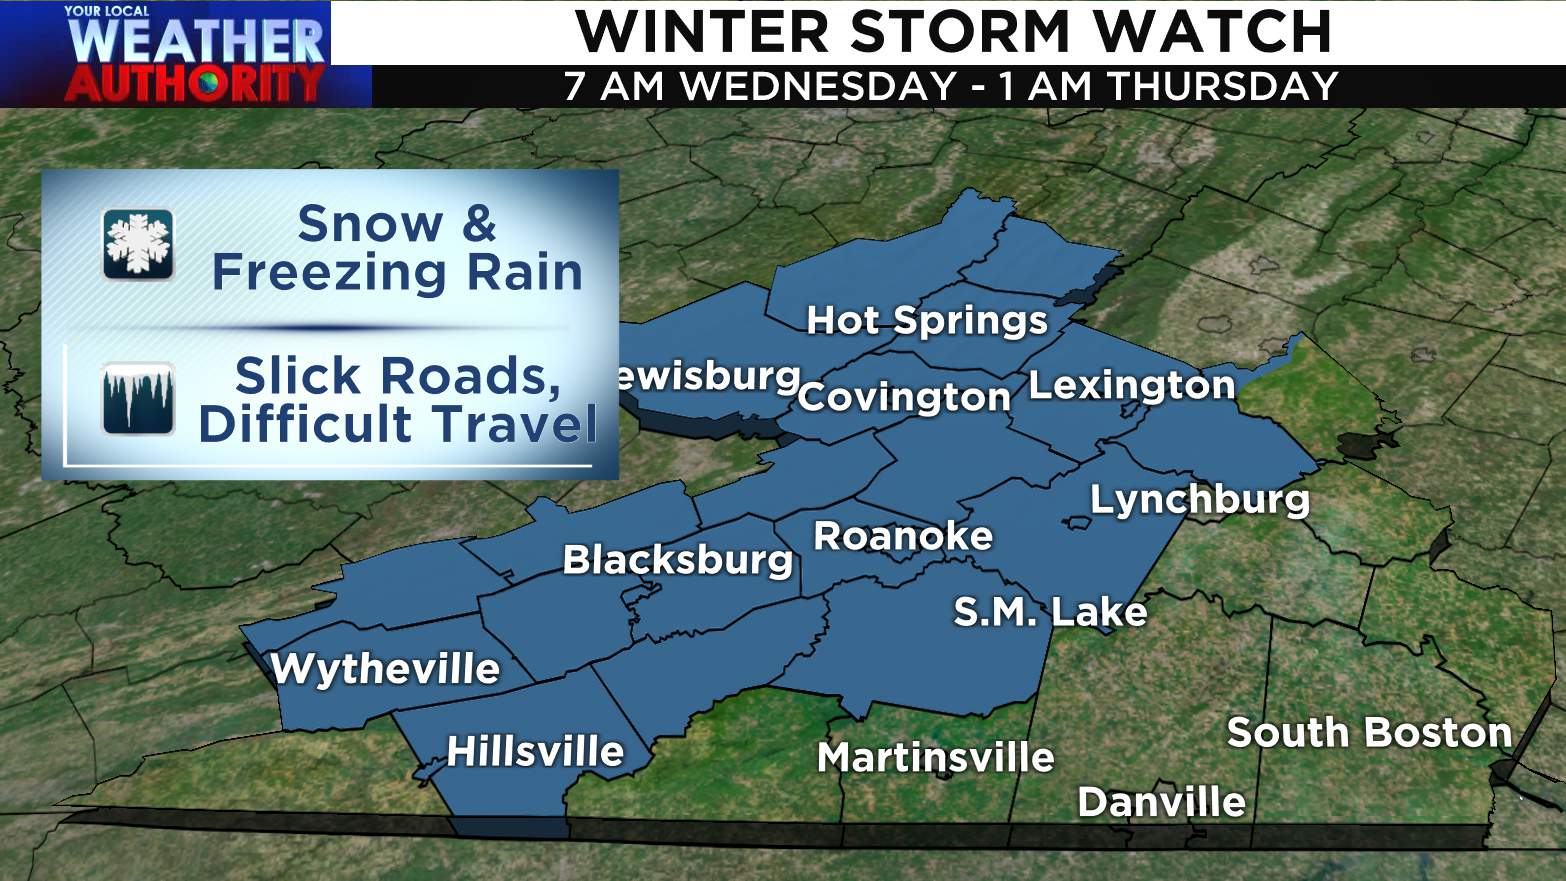 Winter Storm Watch issued for much of Southwest, Central Virginia ahead of Wednesday’s snow, freezing rain